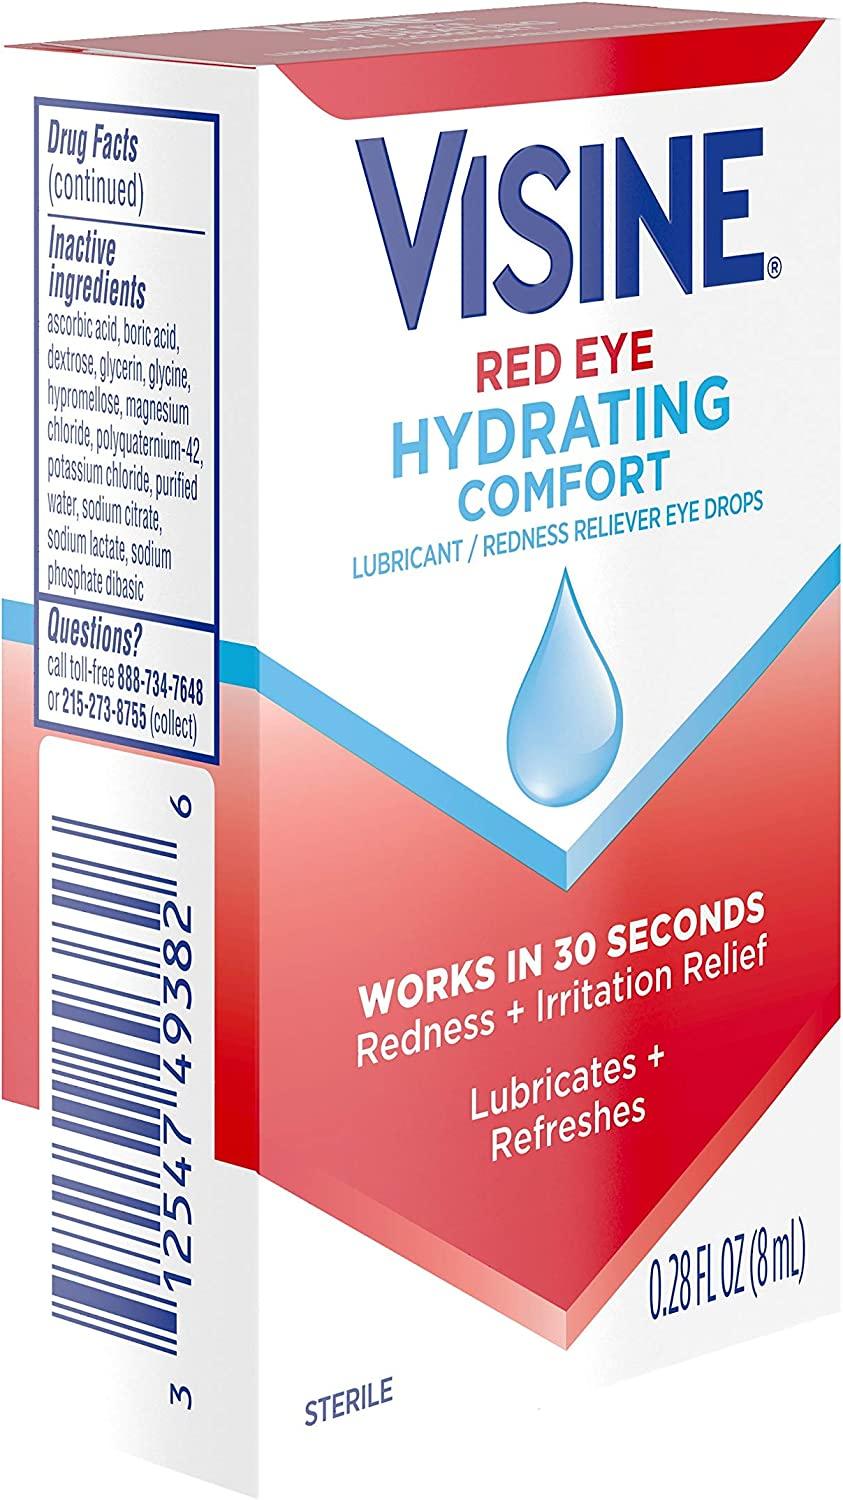  Visine Red Eye Hydrating Comfort Redness Relief and Lubricant  Eye Drops to Help Moisturize and Relieve Red Eyes Due to Minor Eye  Irritations Fast, Tetrahydrozoline HCl, 0.5 fl. oz : Health